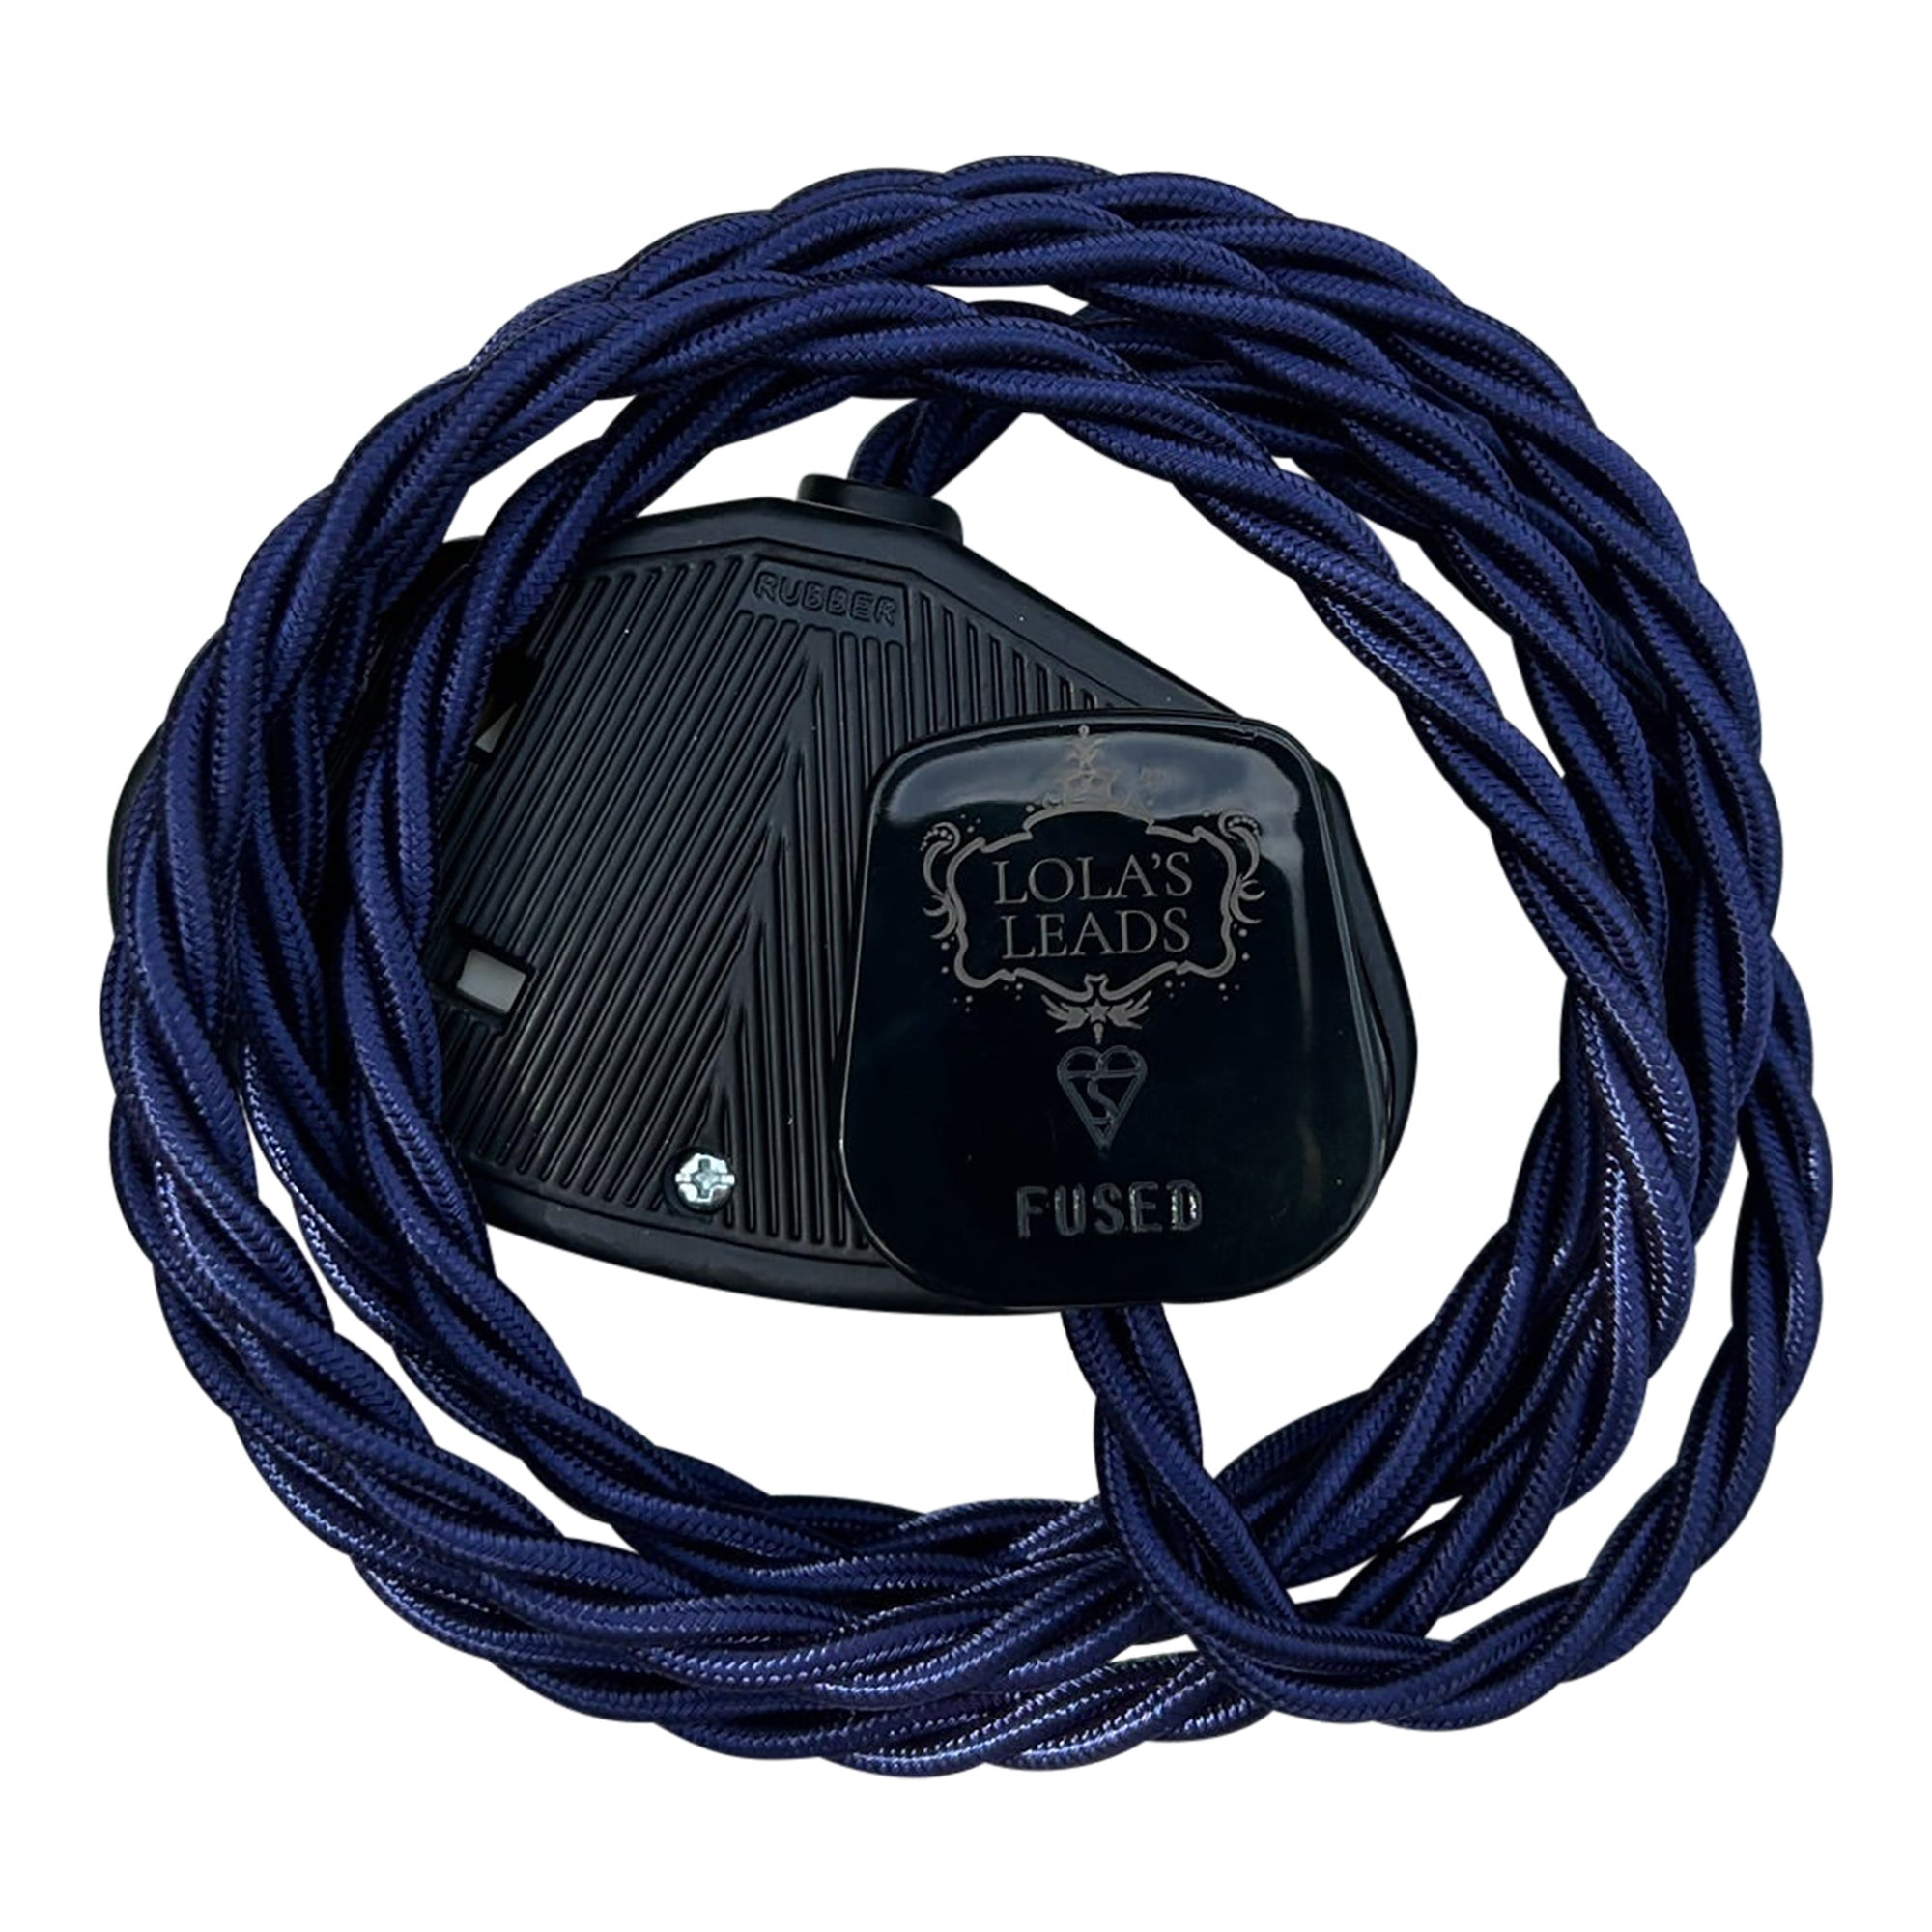 Indigo - Lola's Leads Fabric Extension Cable